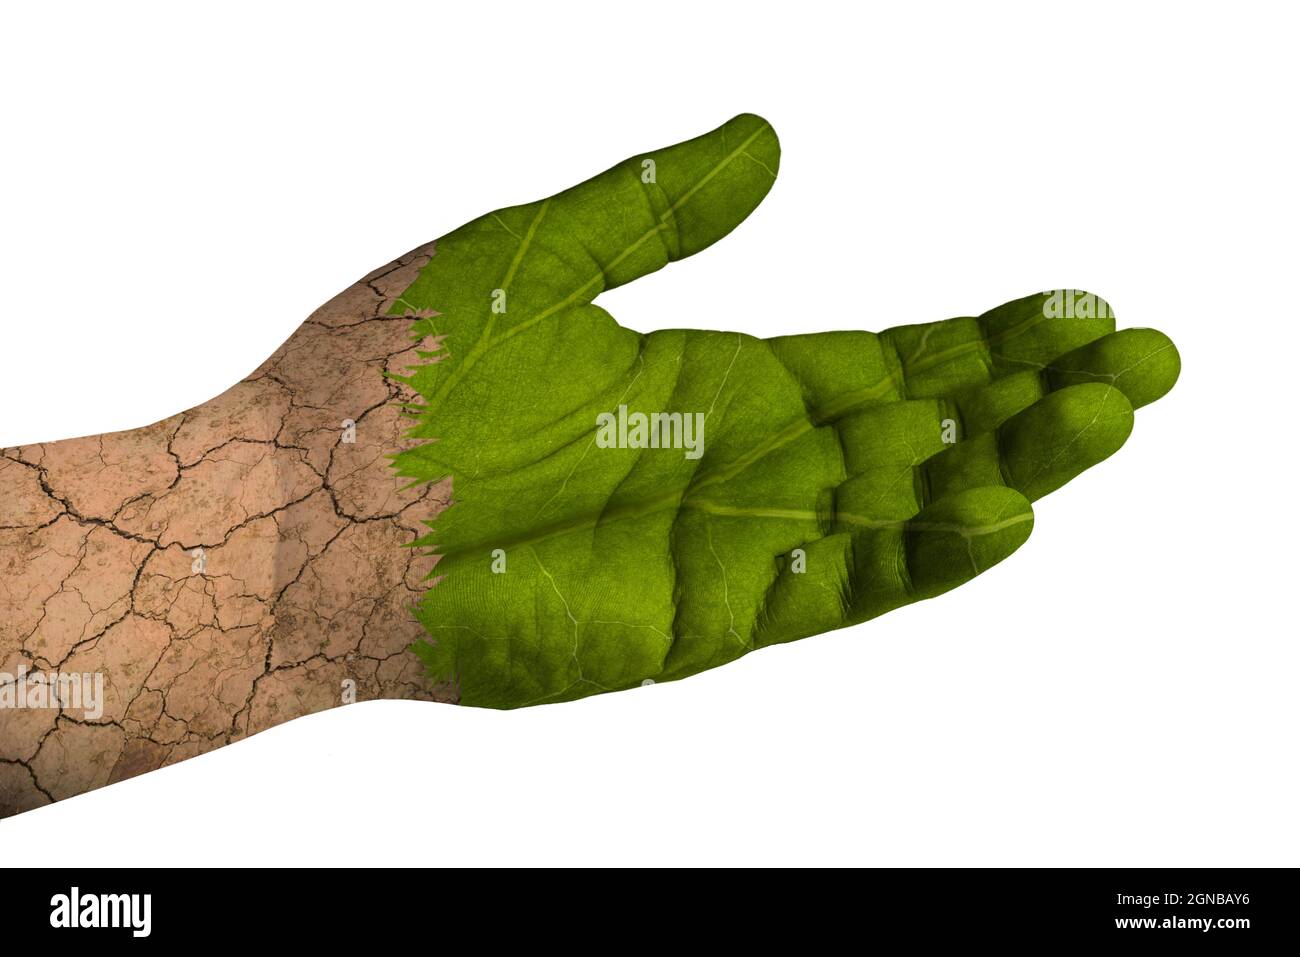 Climate change, a hand loses its leaf texture and turns into arid soil Stock Photo